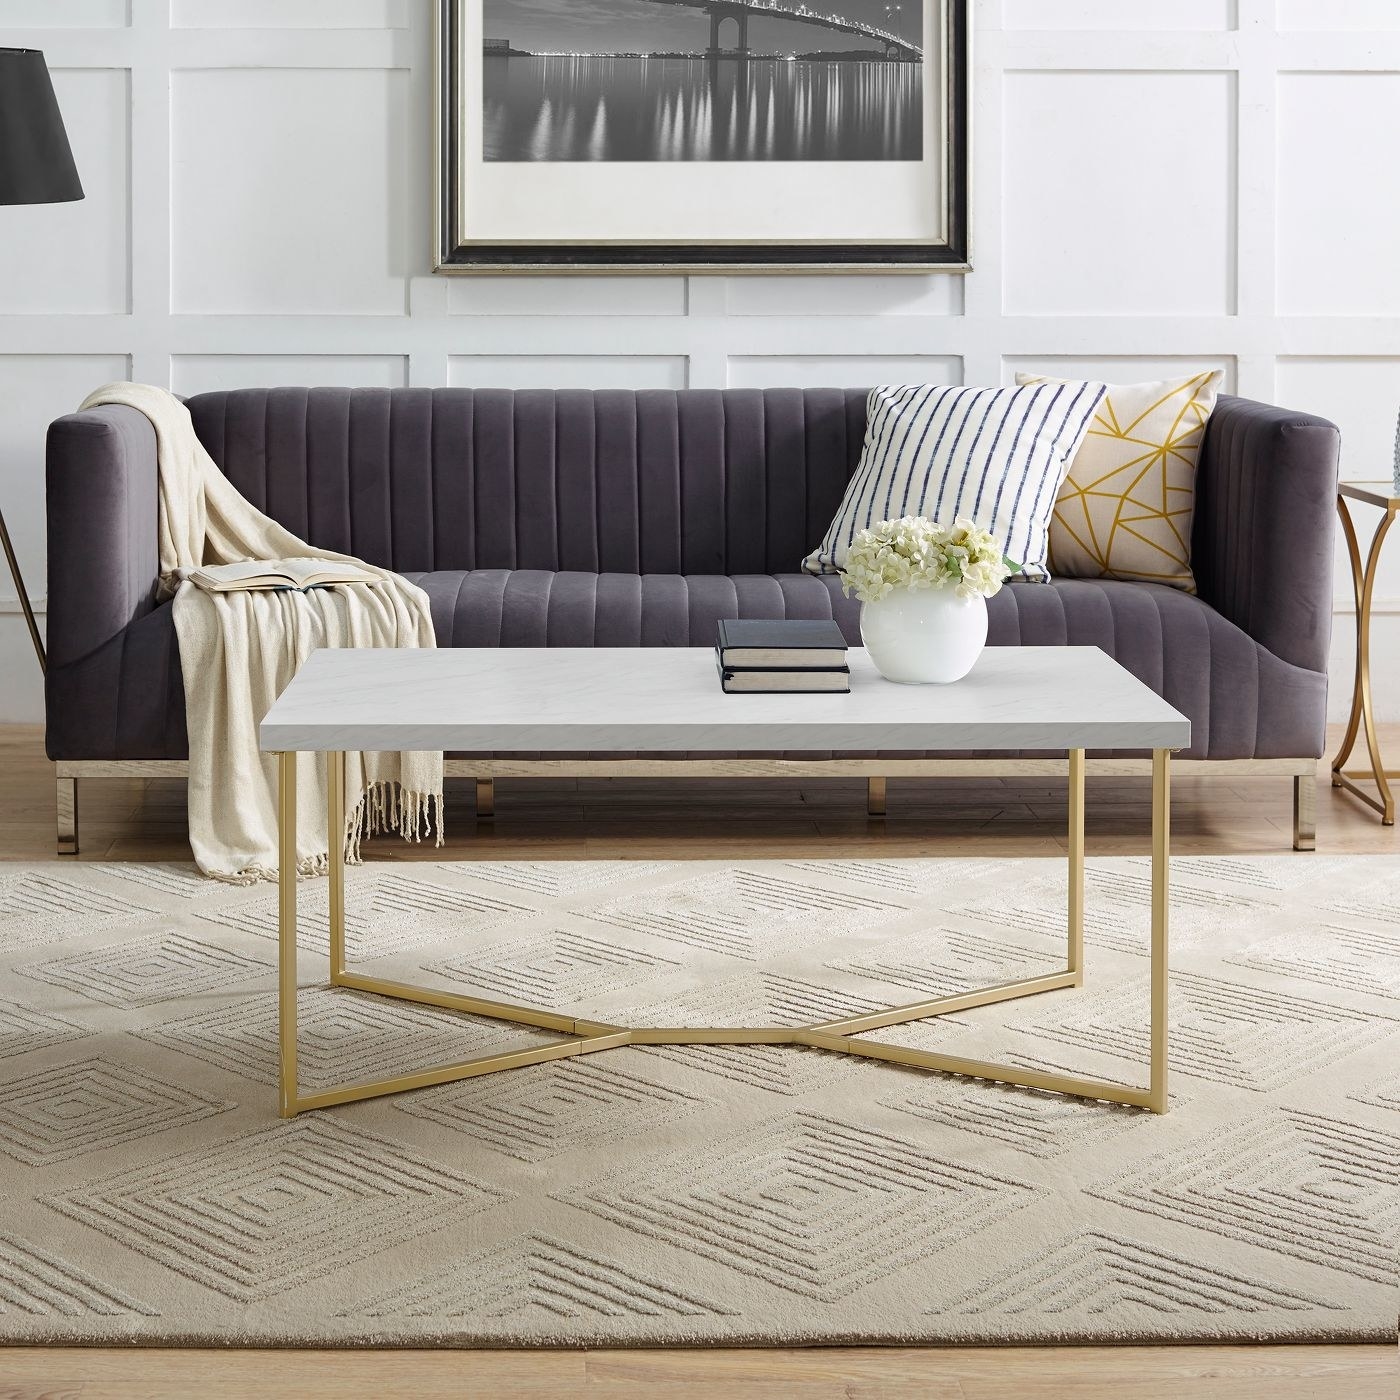 The rectangular gold and faux marble table in front of a purple couch